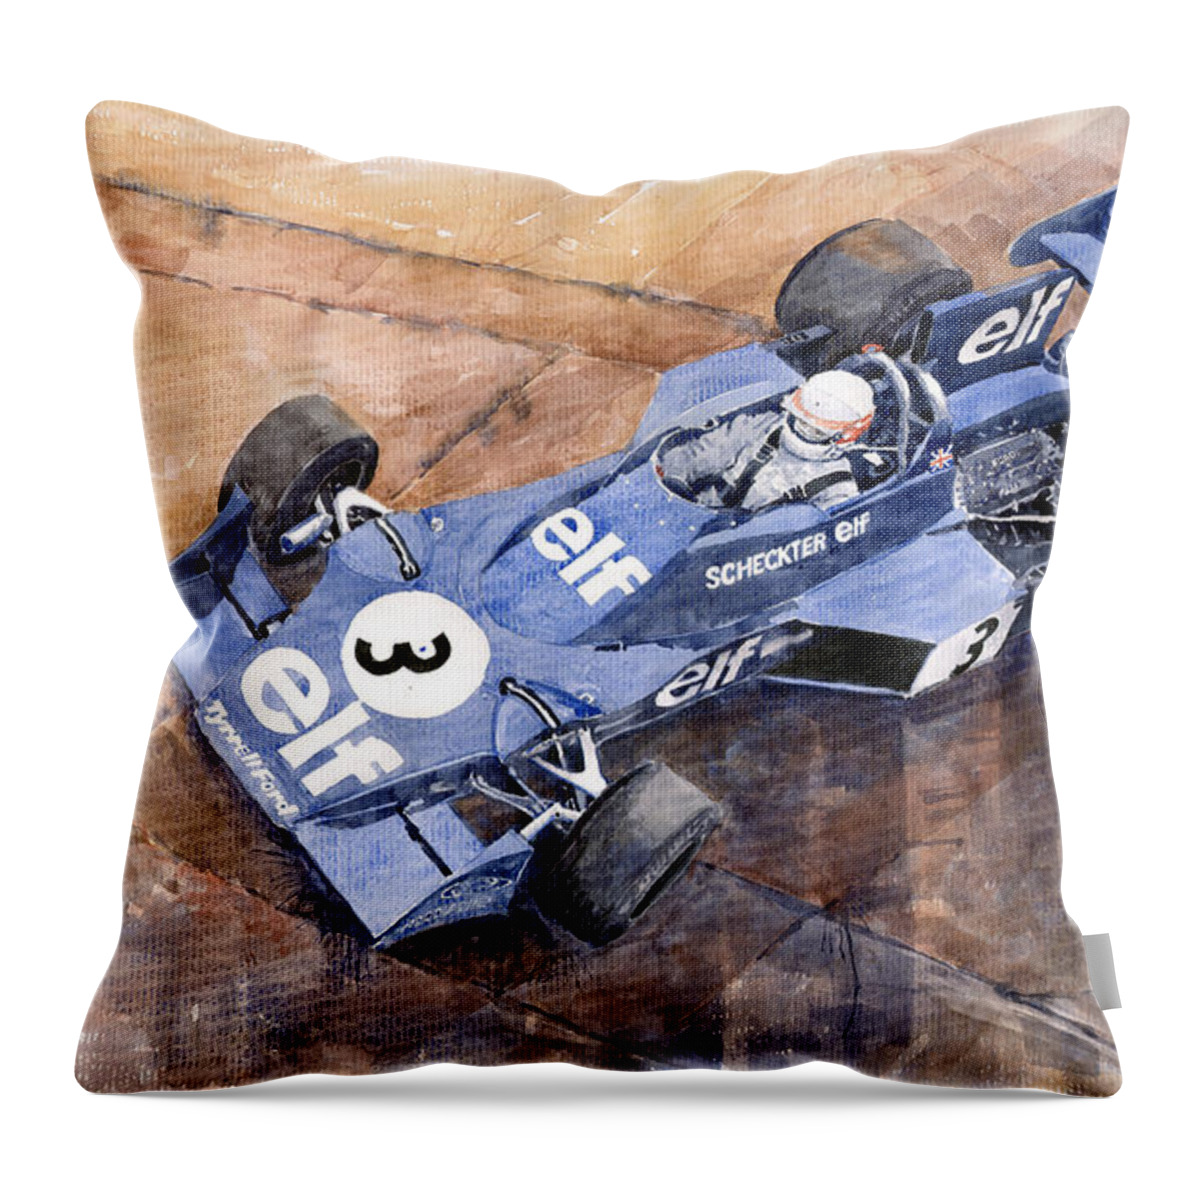 Watercolor Throw Pillow featuring the painting Tyrrell Ford 007 Jody Scheckter 1974 Swedish GP by Yuriy Shevchuk